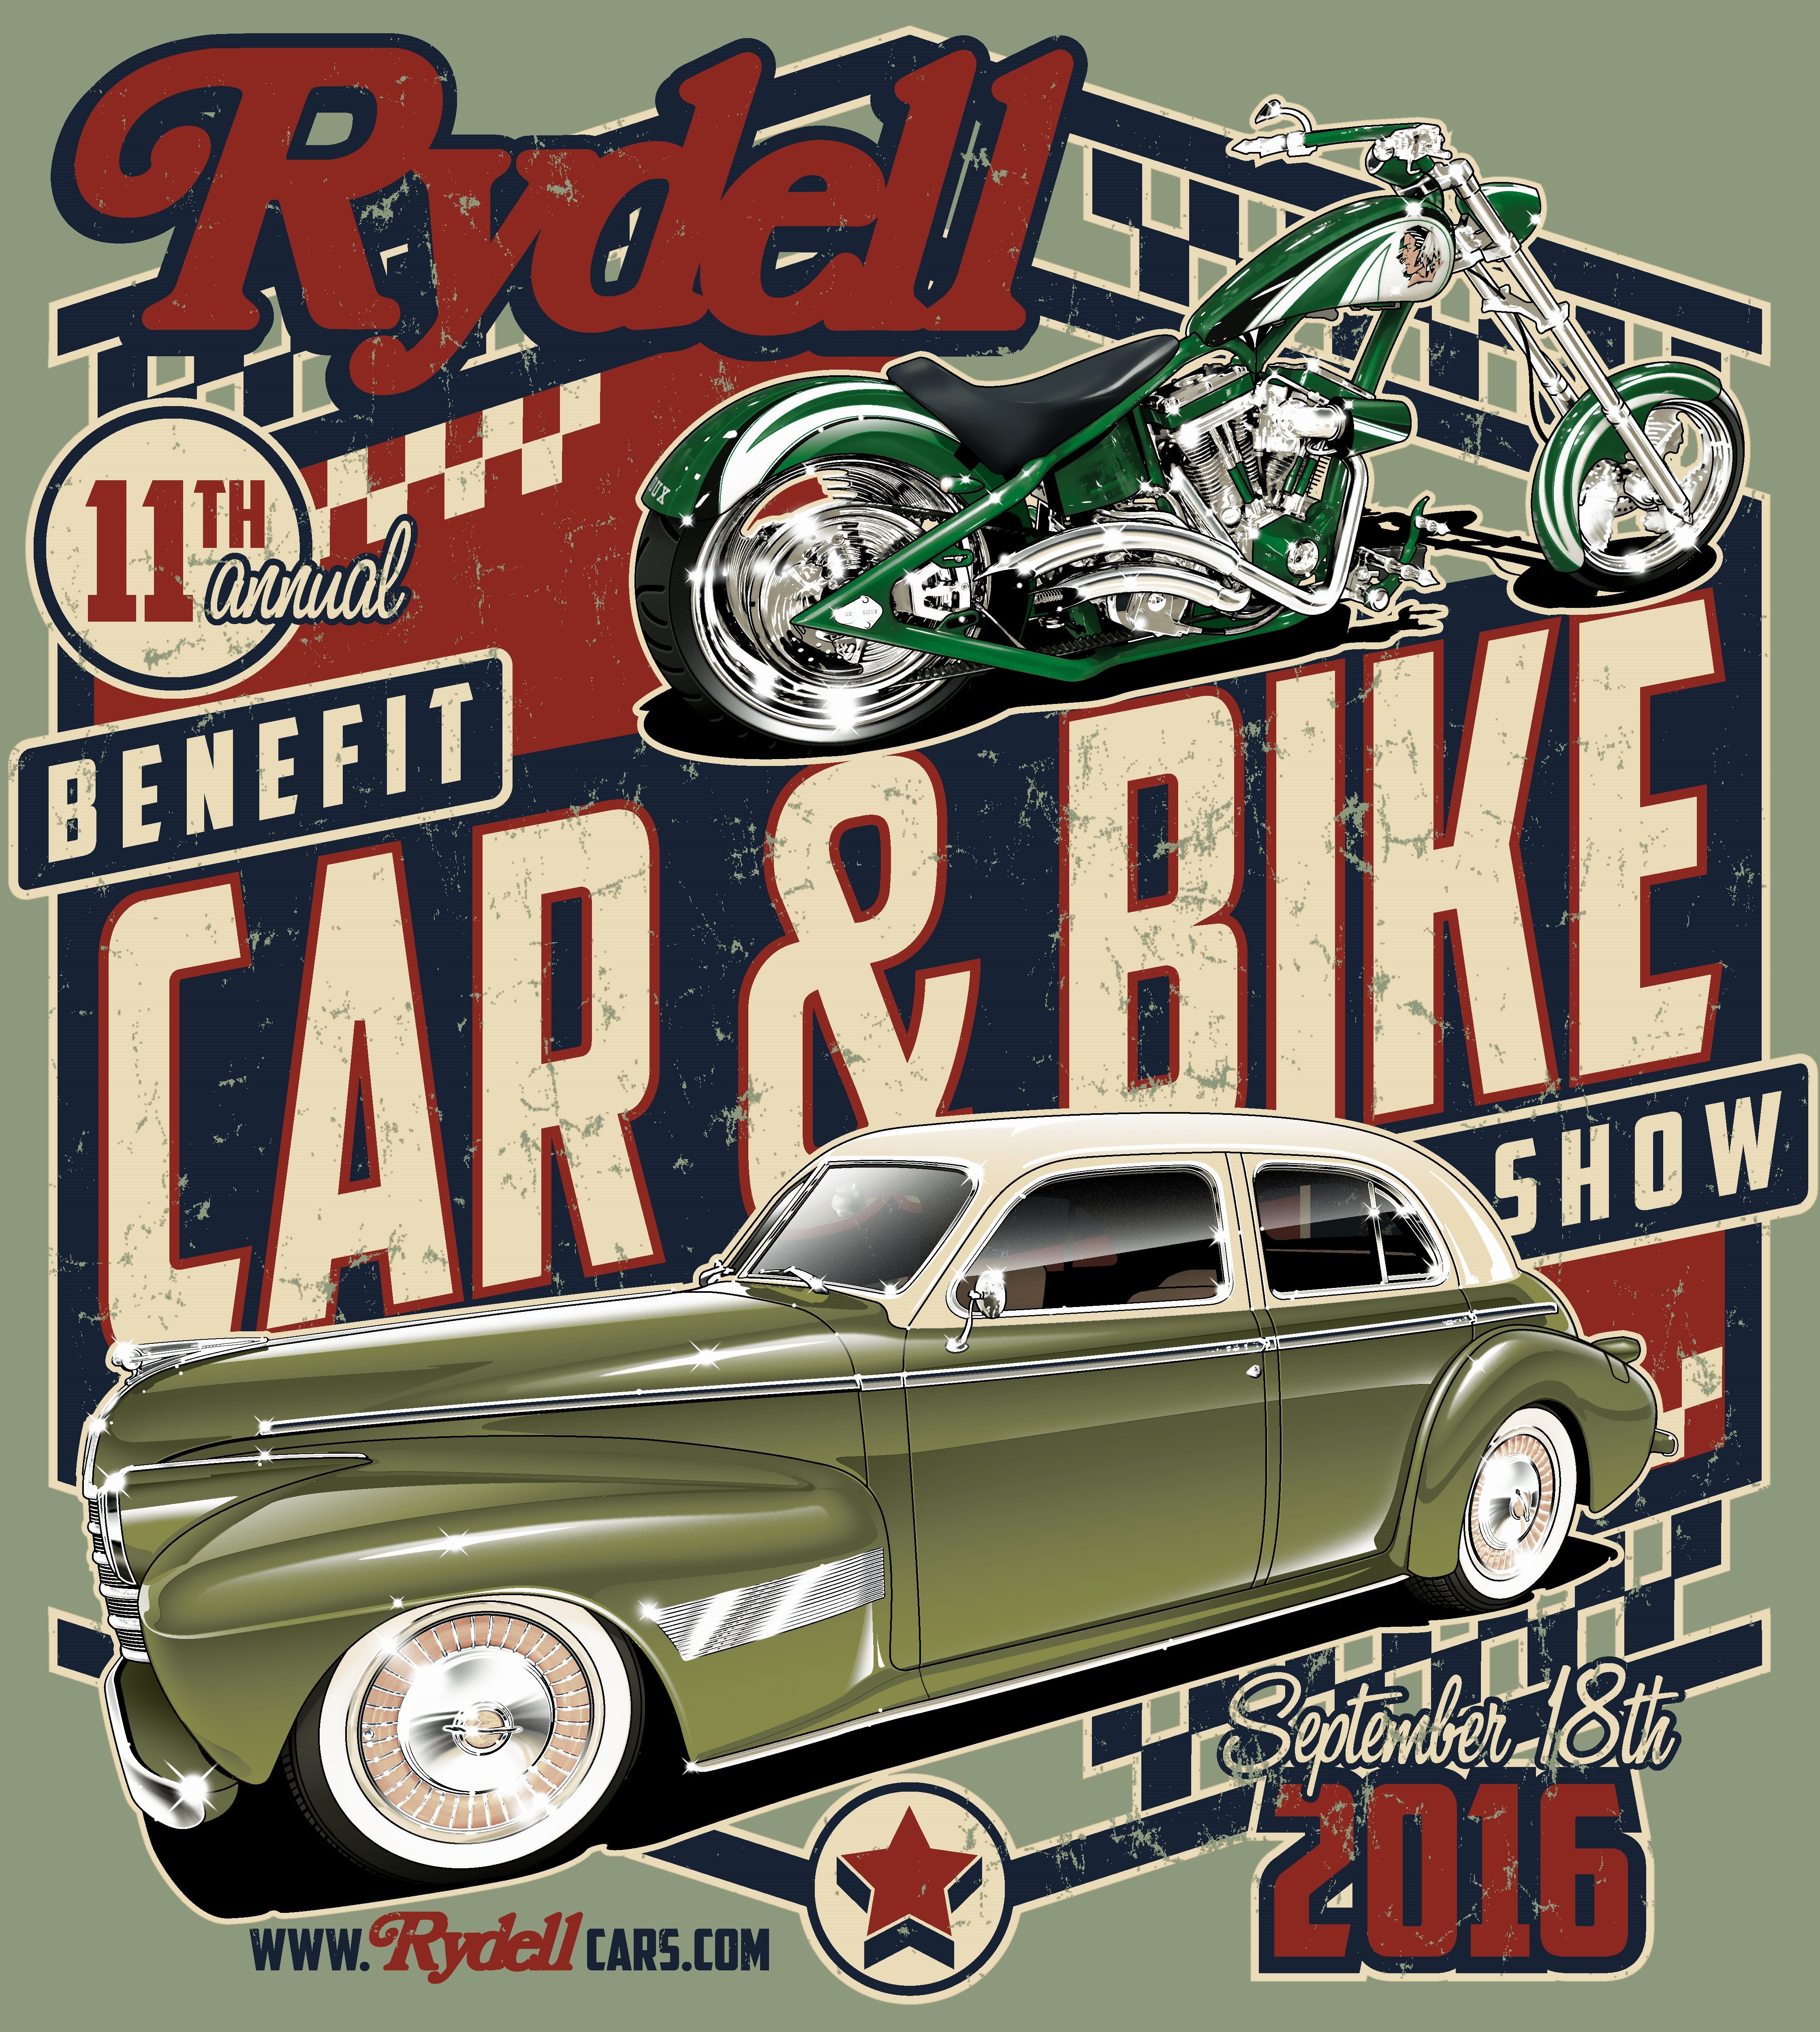 2016 Rydell 11th Annual Benfit Car and Bike Show